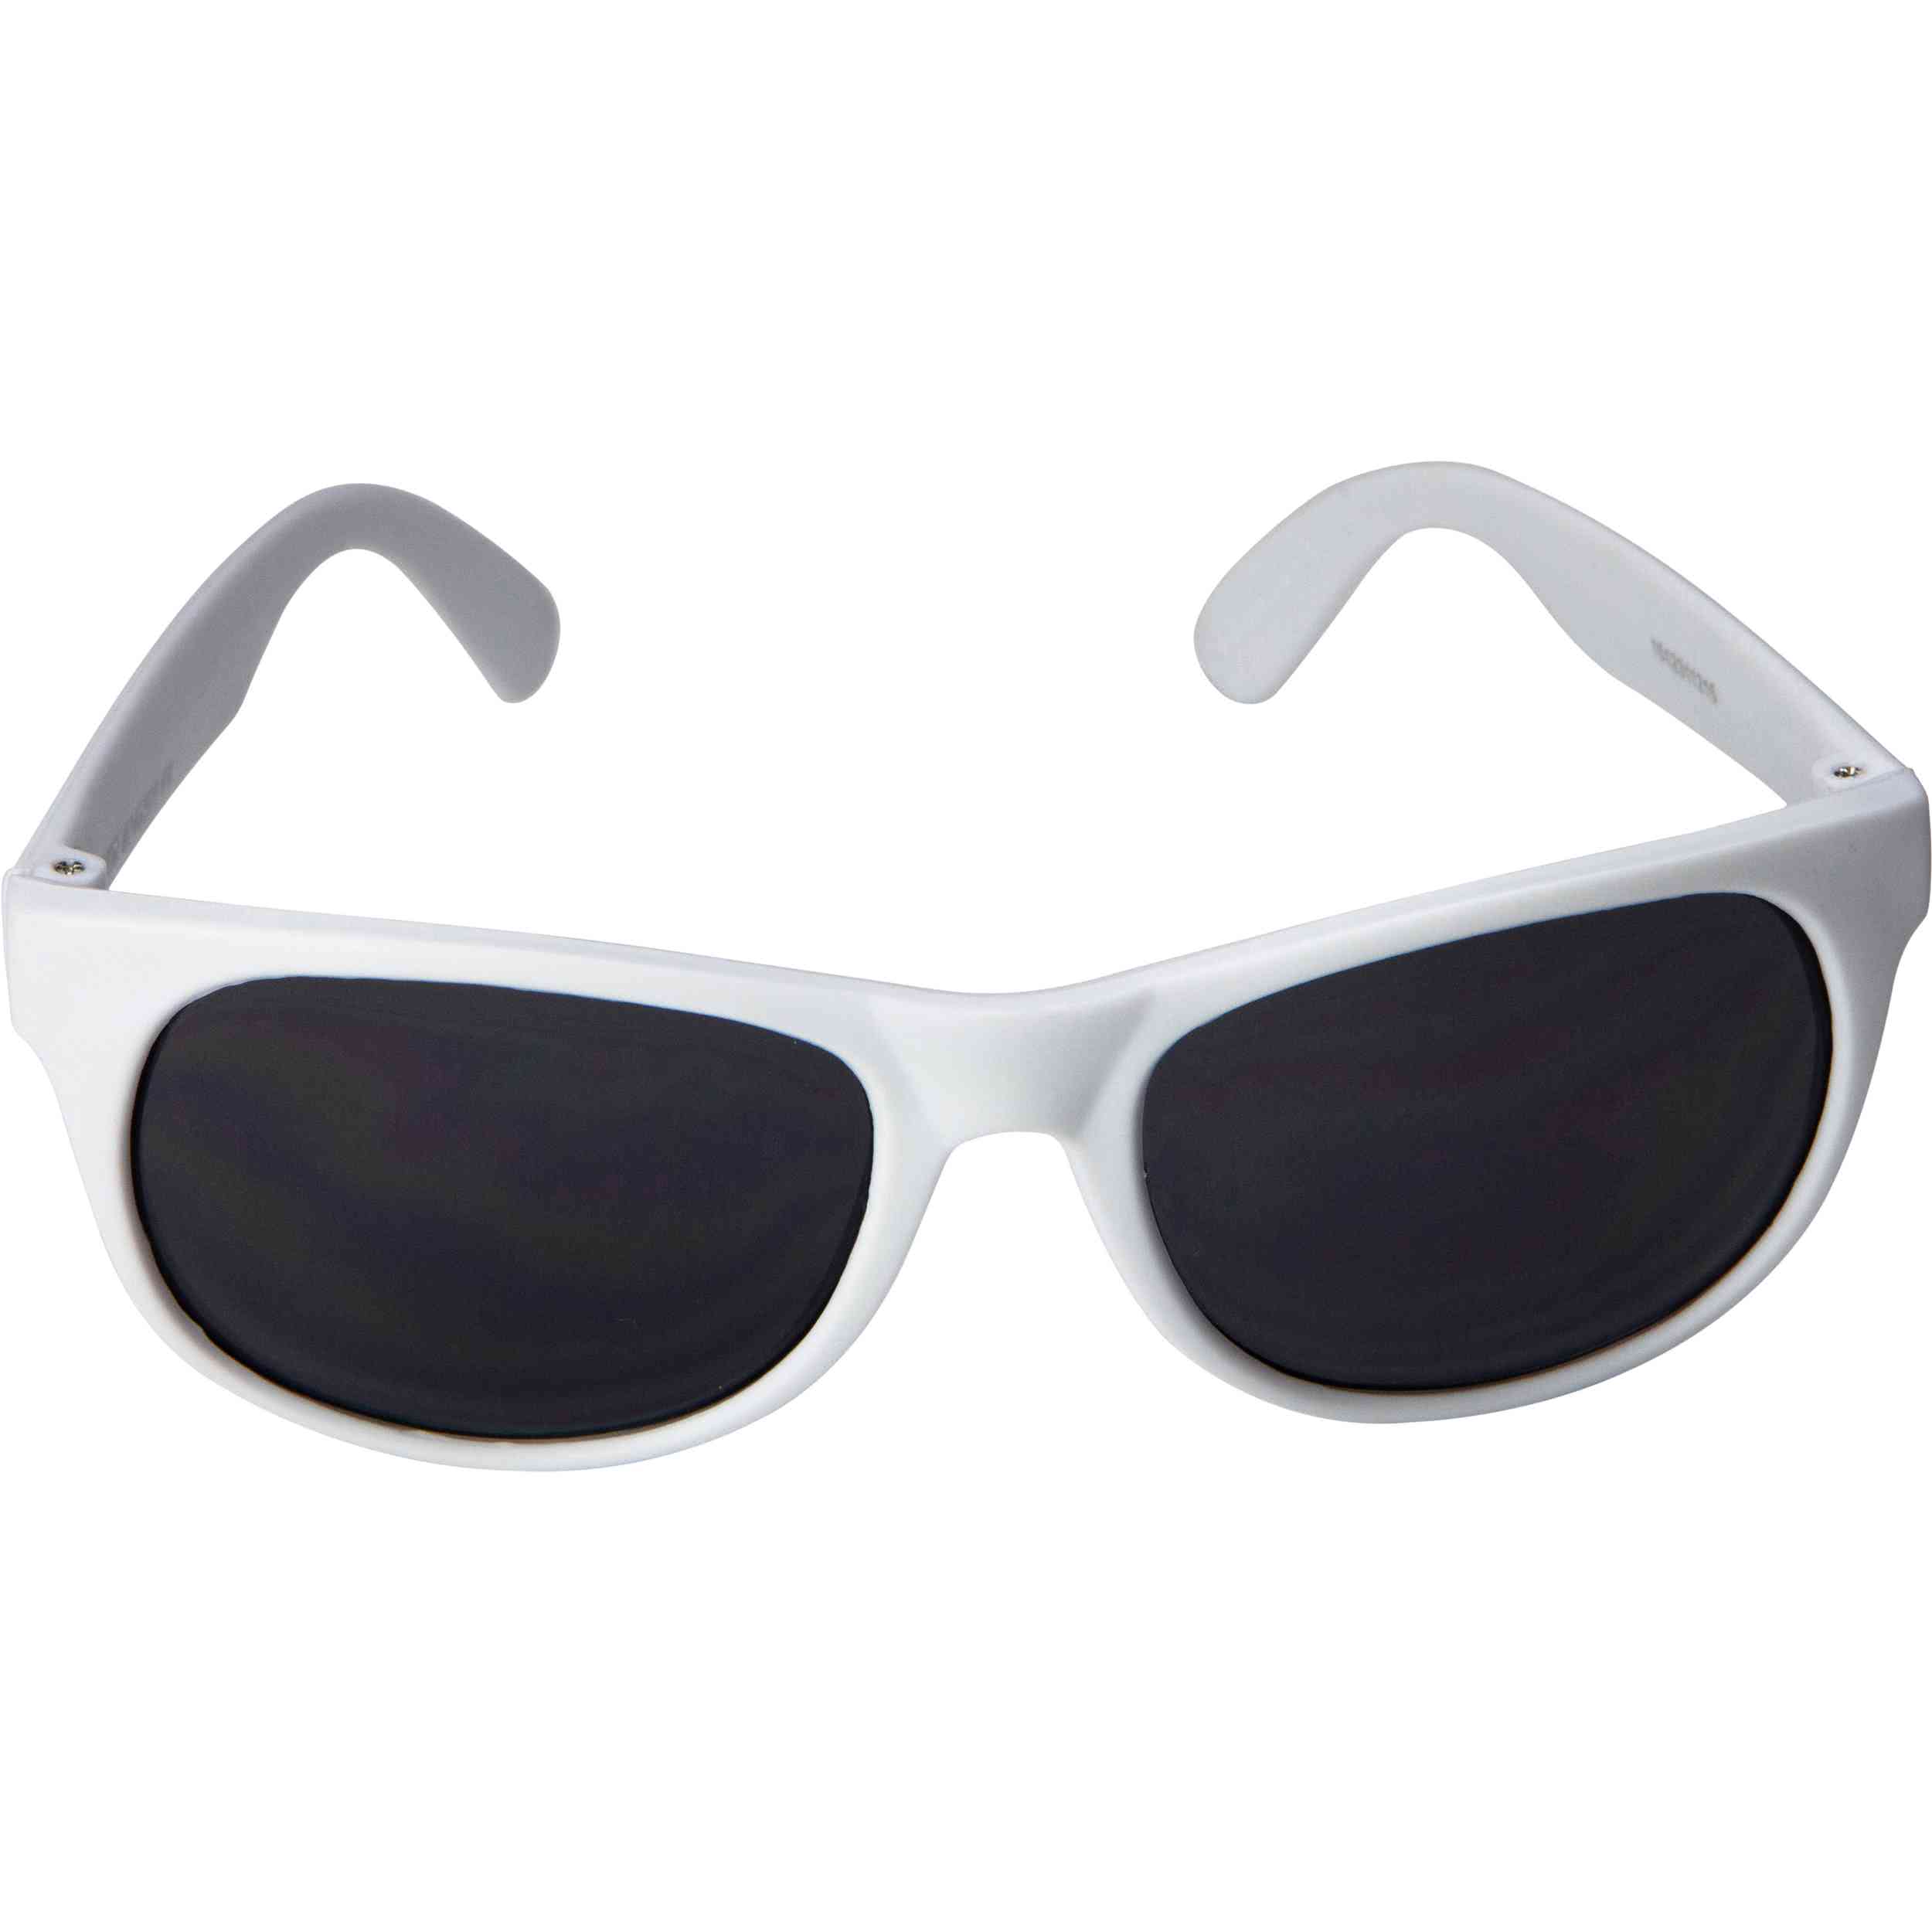 Promotional Rubberized Sunglasses with Custom Logo for $0.69 Ea.